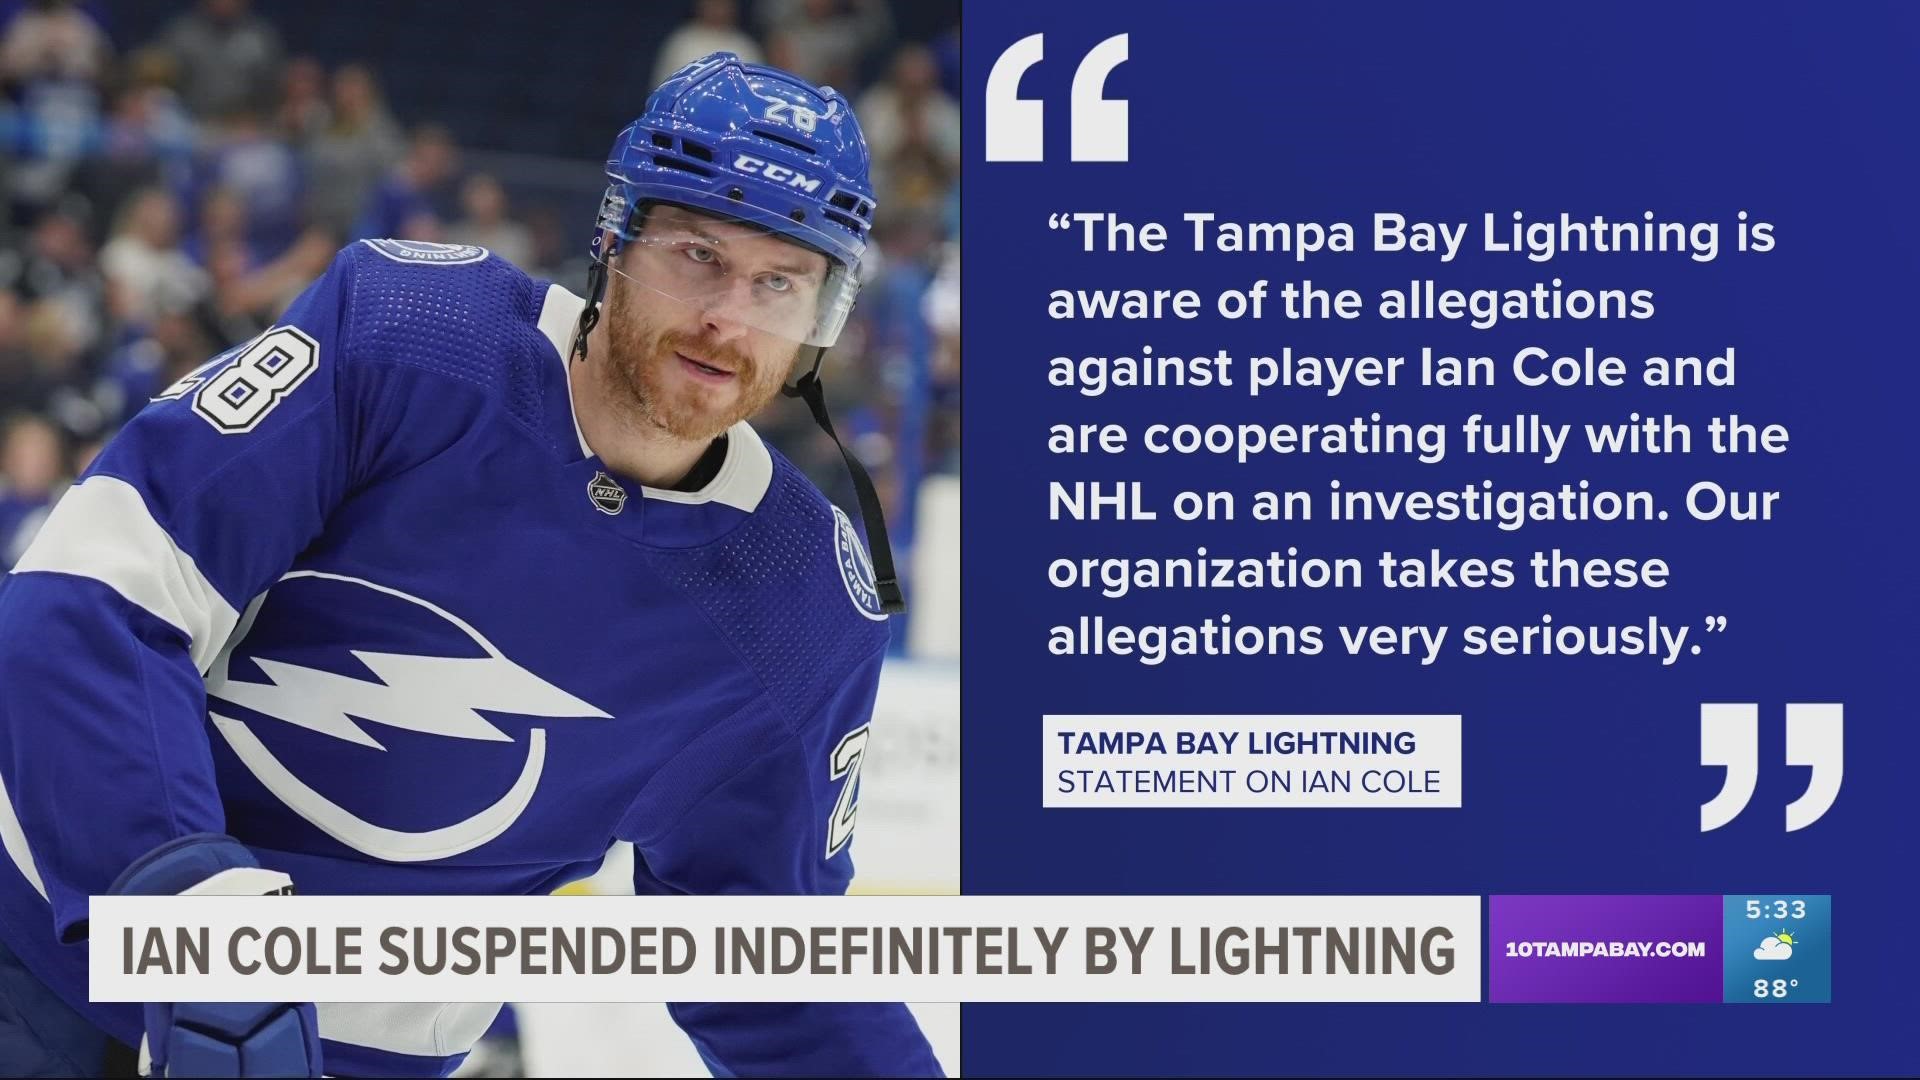 No players or coaches with the Tampa Bay Lightning will comment further on the situation due to the ongoing investigation.